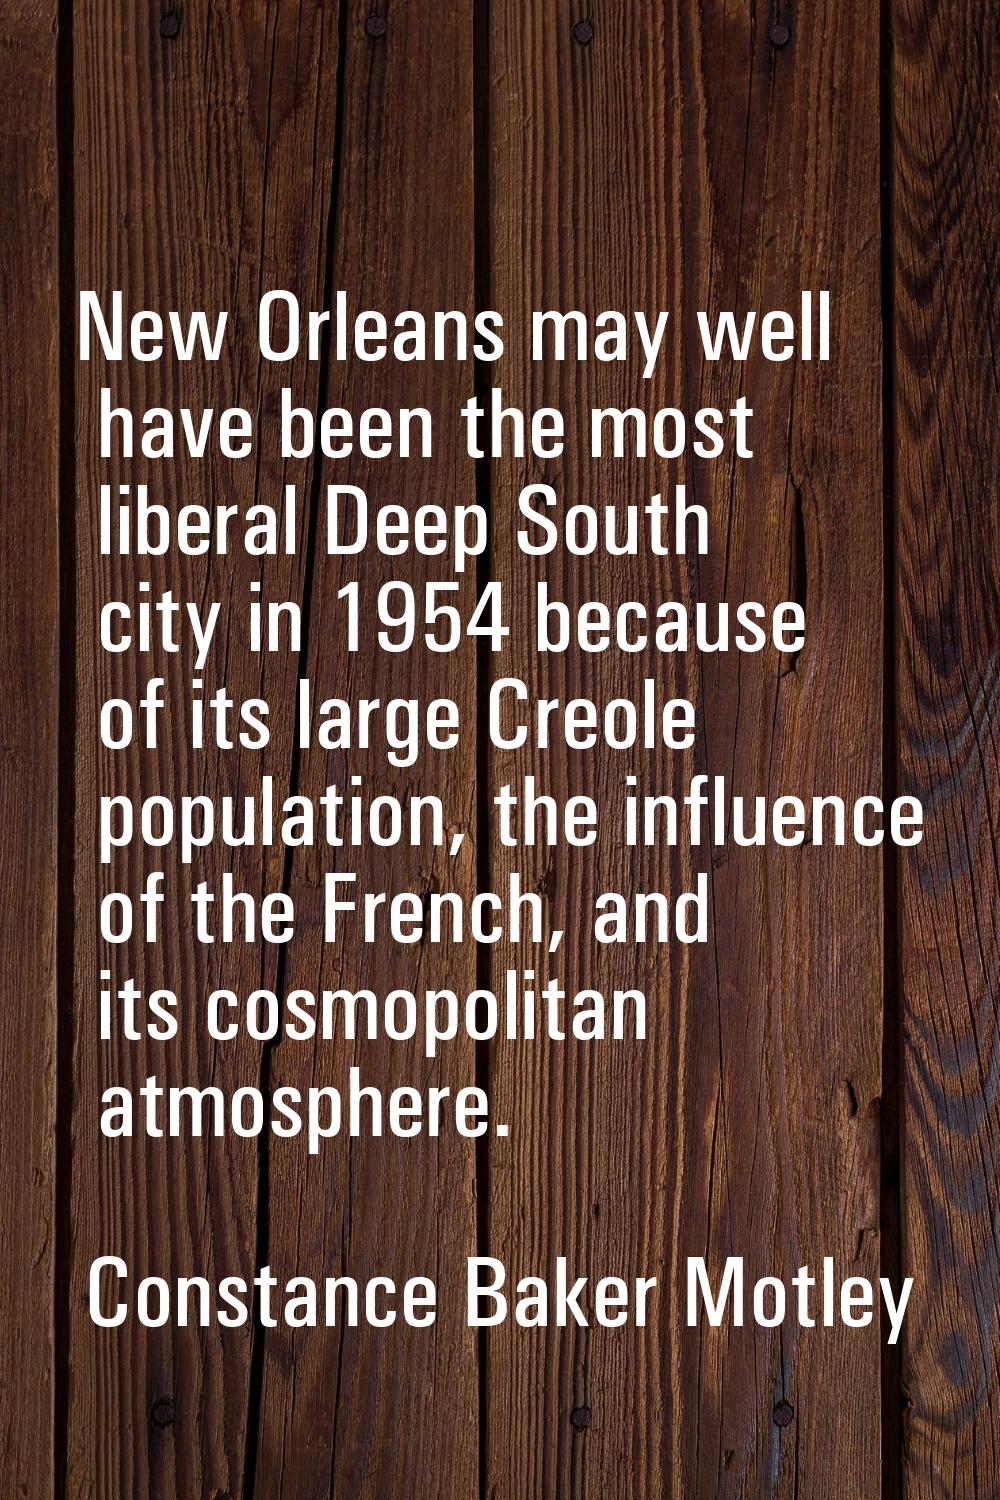 New Orleans may well have been the most liberal Deep South city in 1954 because of its large Creole